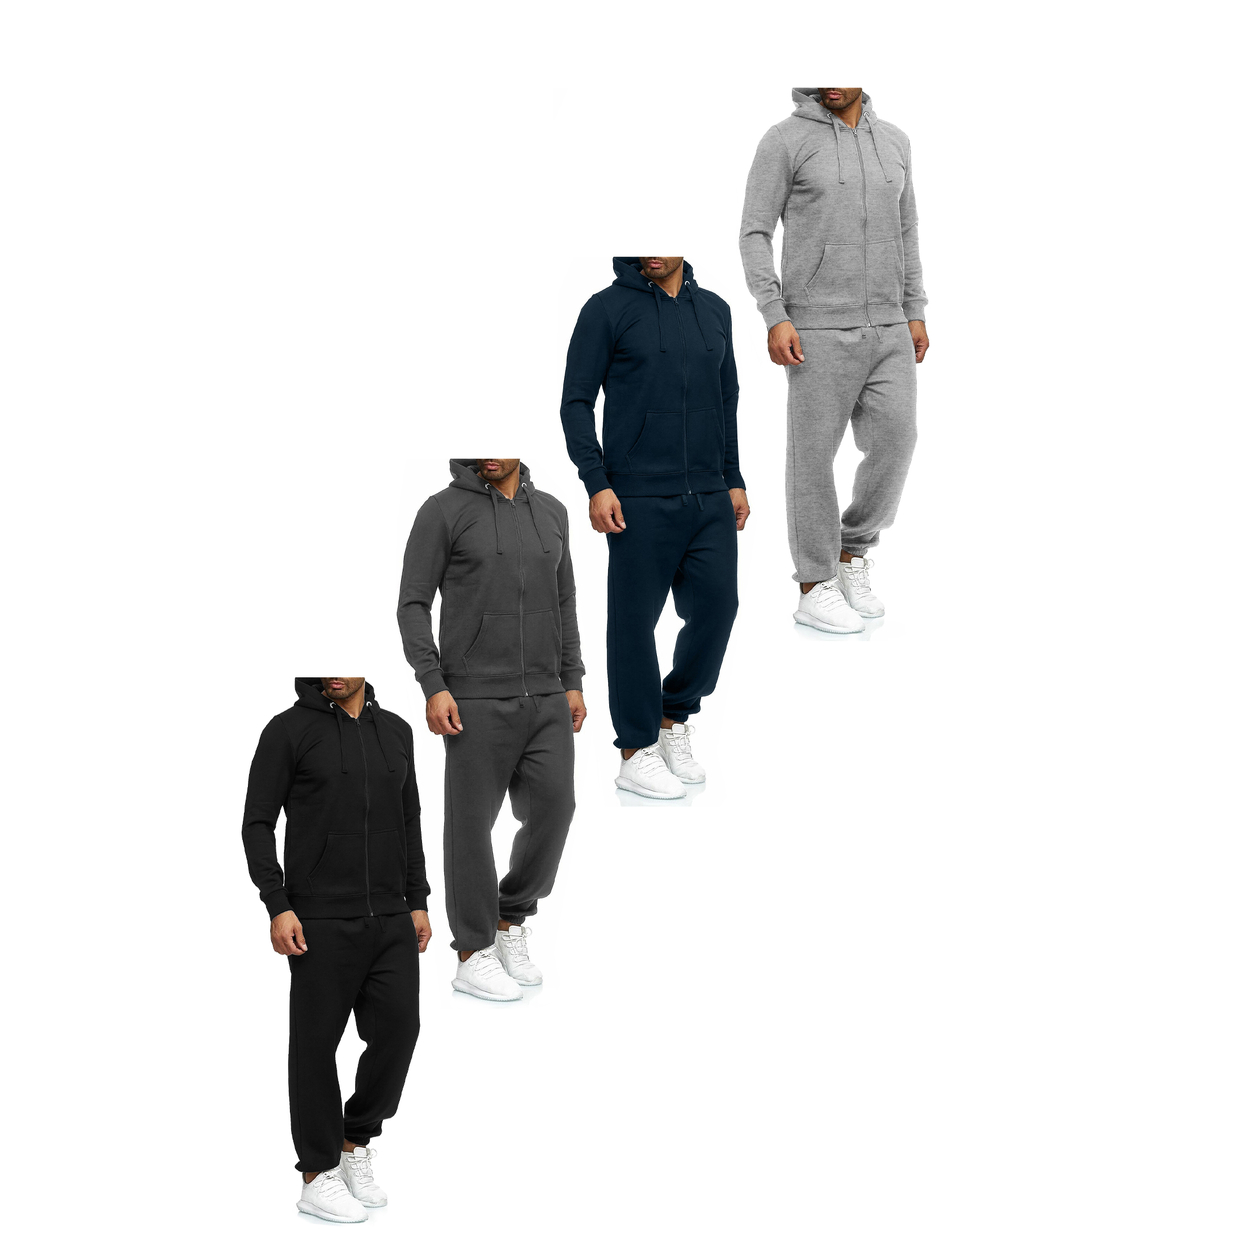 Multi-Pack: Men's Casual Big & Tall Athletic Active Winter Warm Fleece Lined Full Zip Tracksuit Jogger Set - Navy, 1-pack, Xx-large